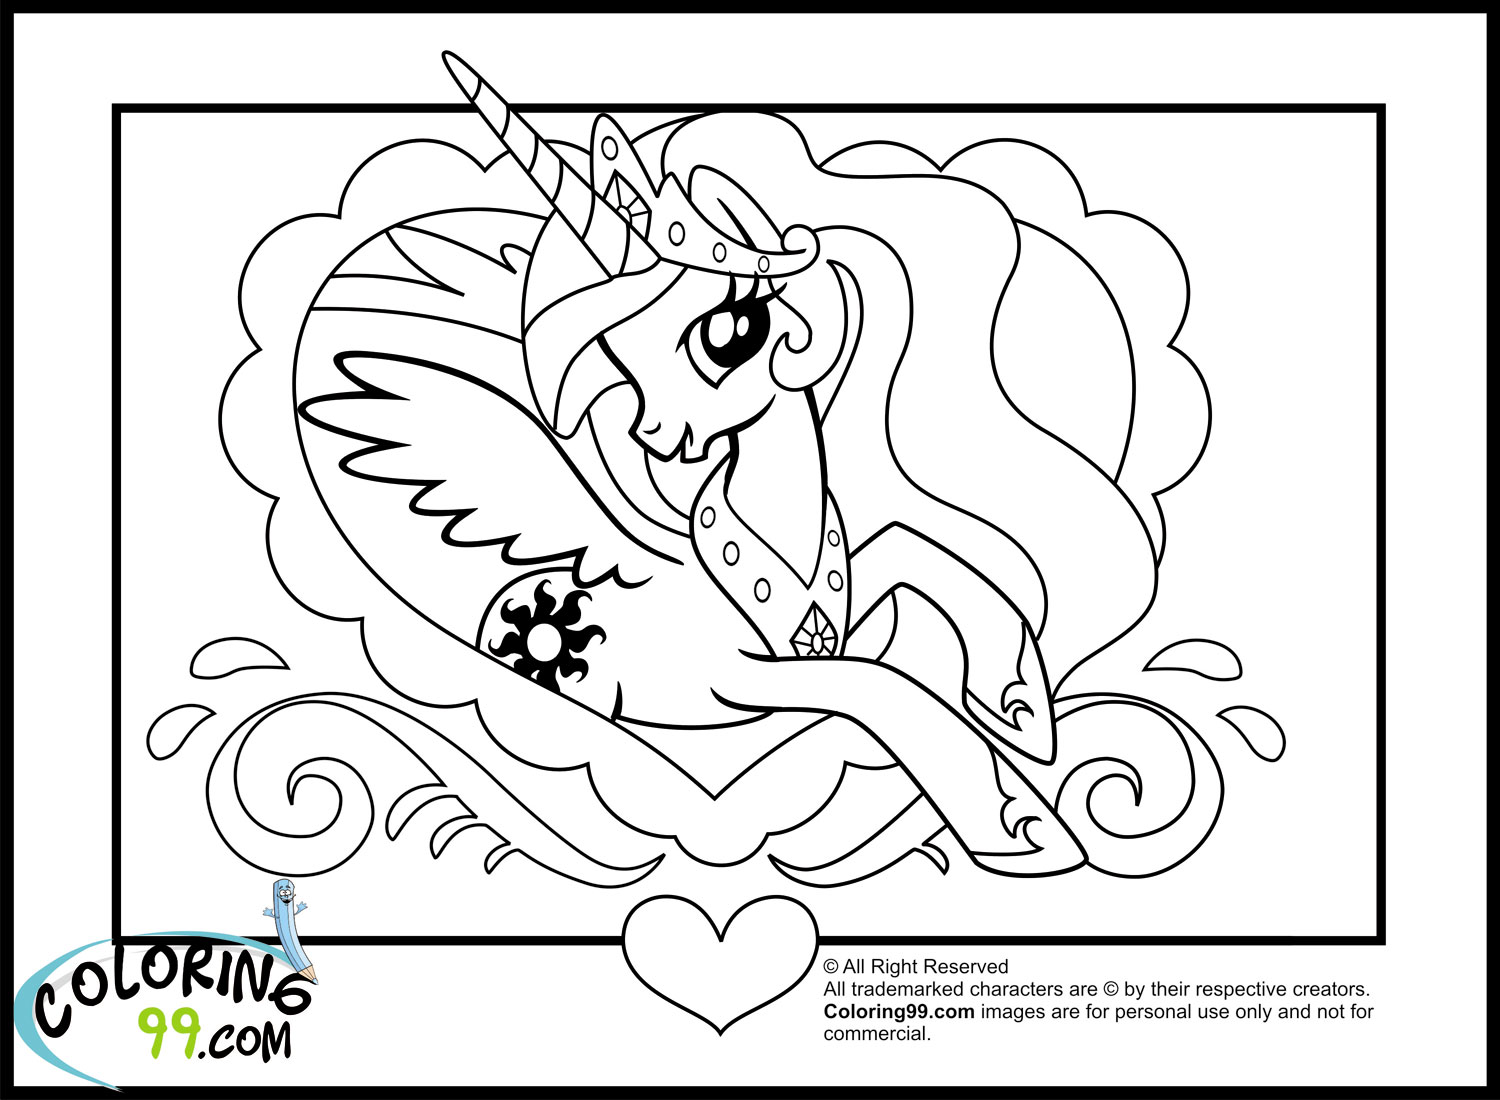 Download My Little Pony Princess Celestia Coloring Pages | Team colors